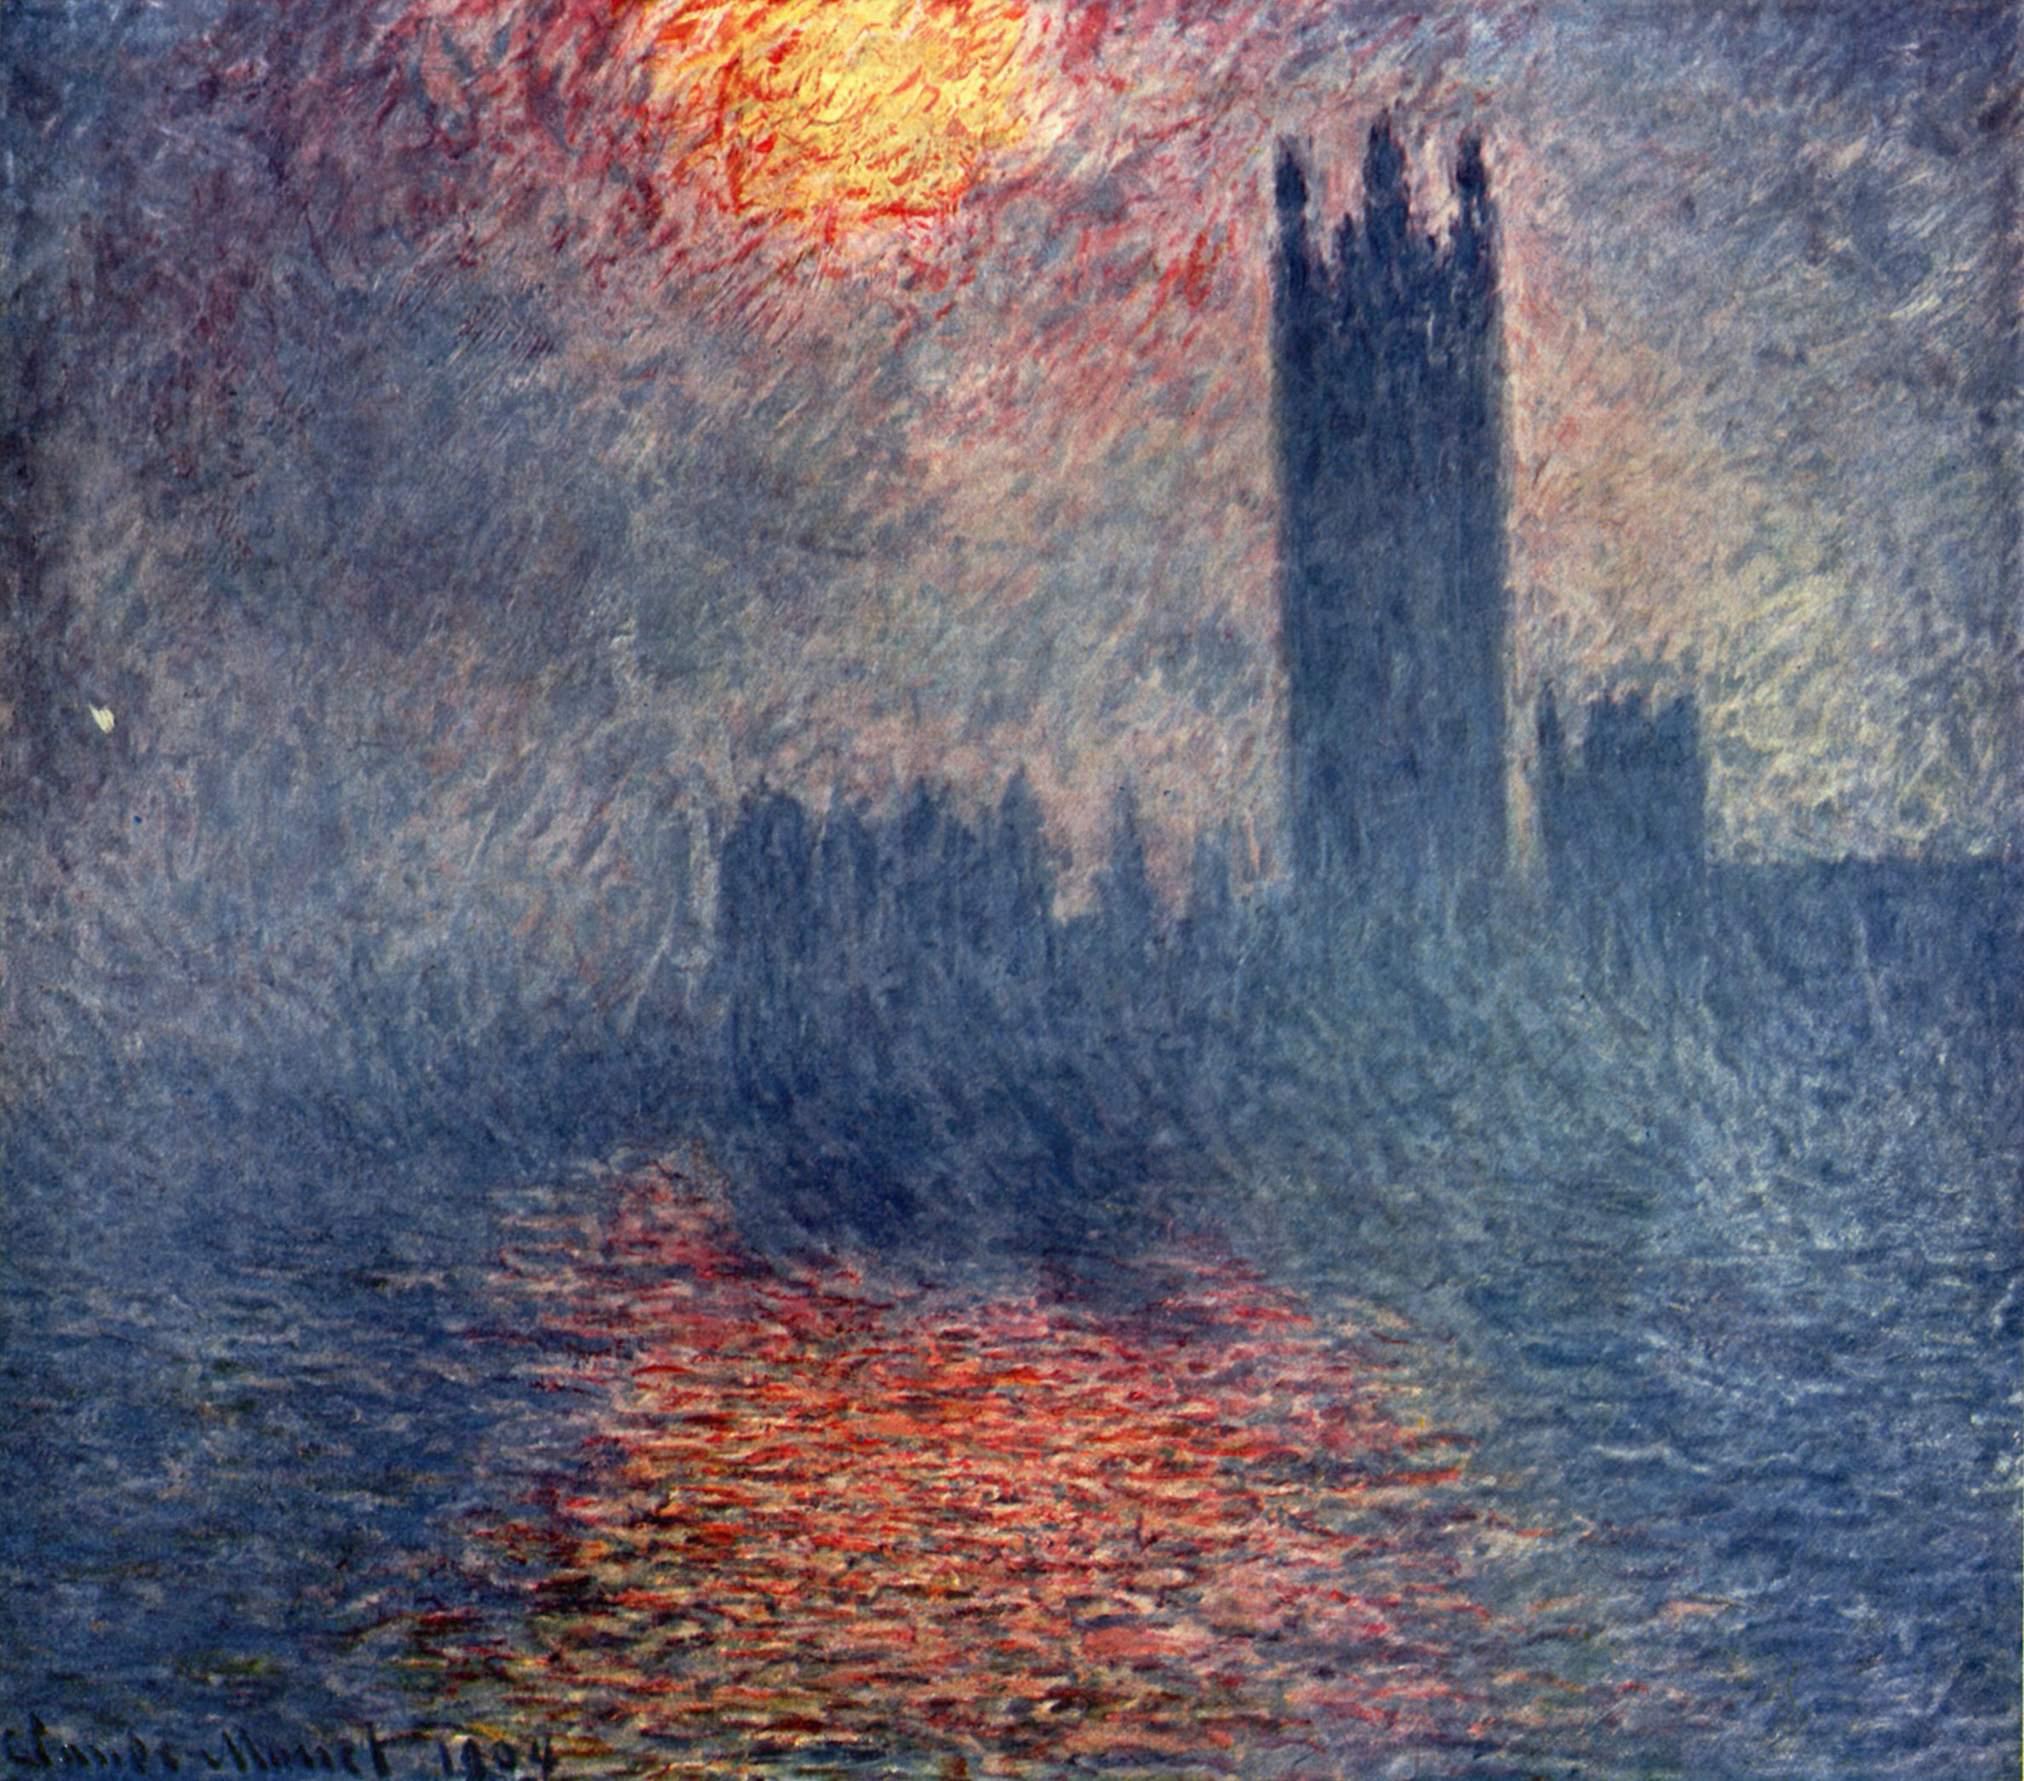 The Parliament Of London At Sunset By Monet Wallpaper for Desktop ...